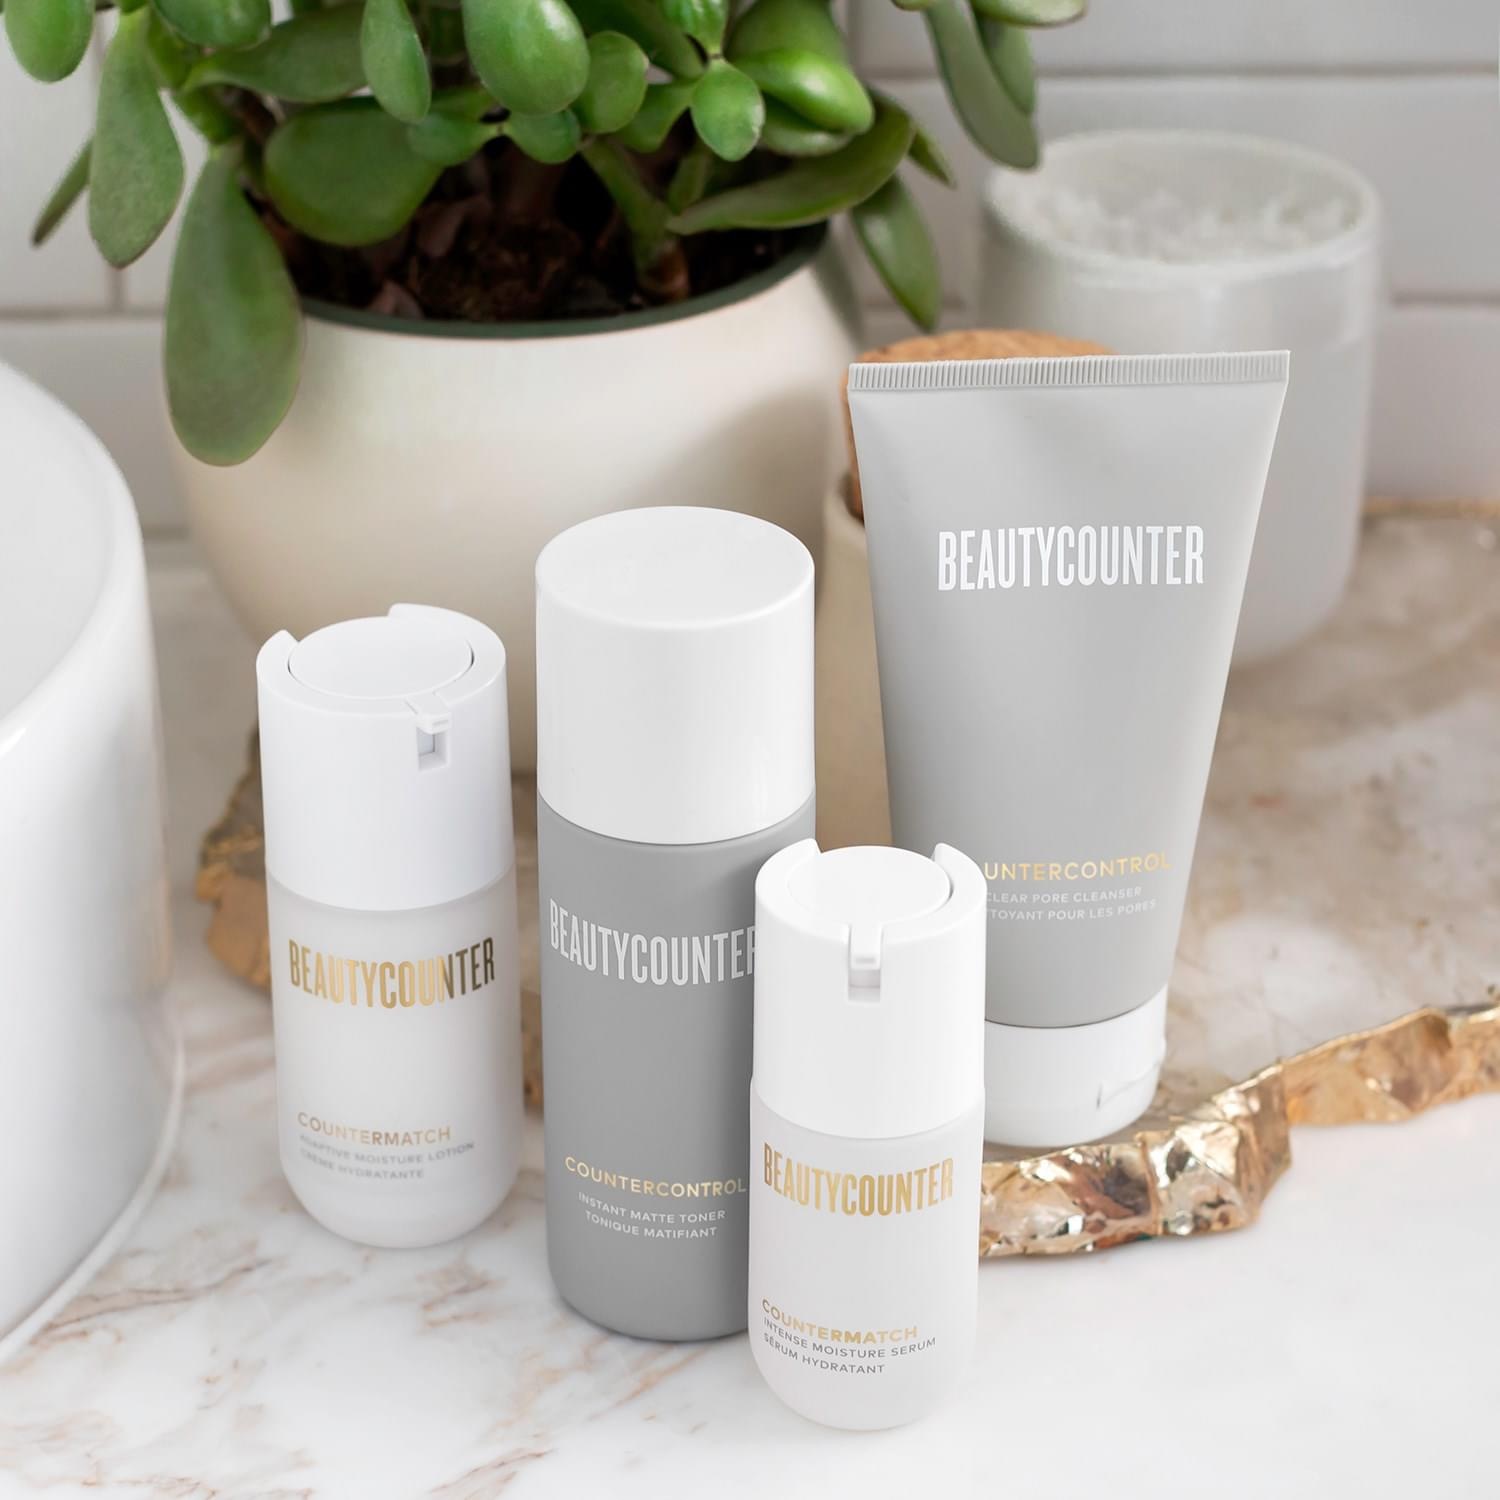 Beautycounter skincare regimens: Countermatch and Countercontrol products